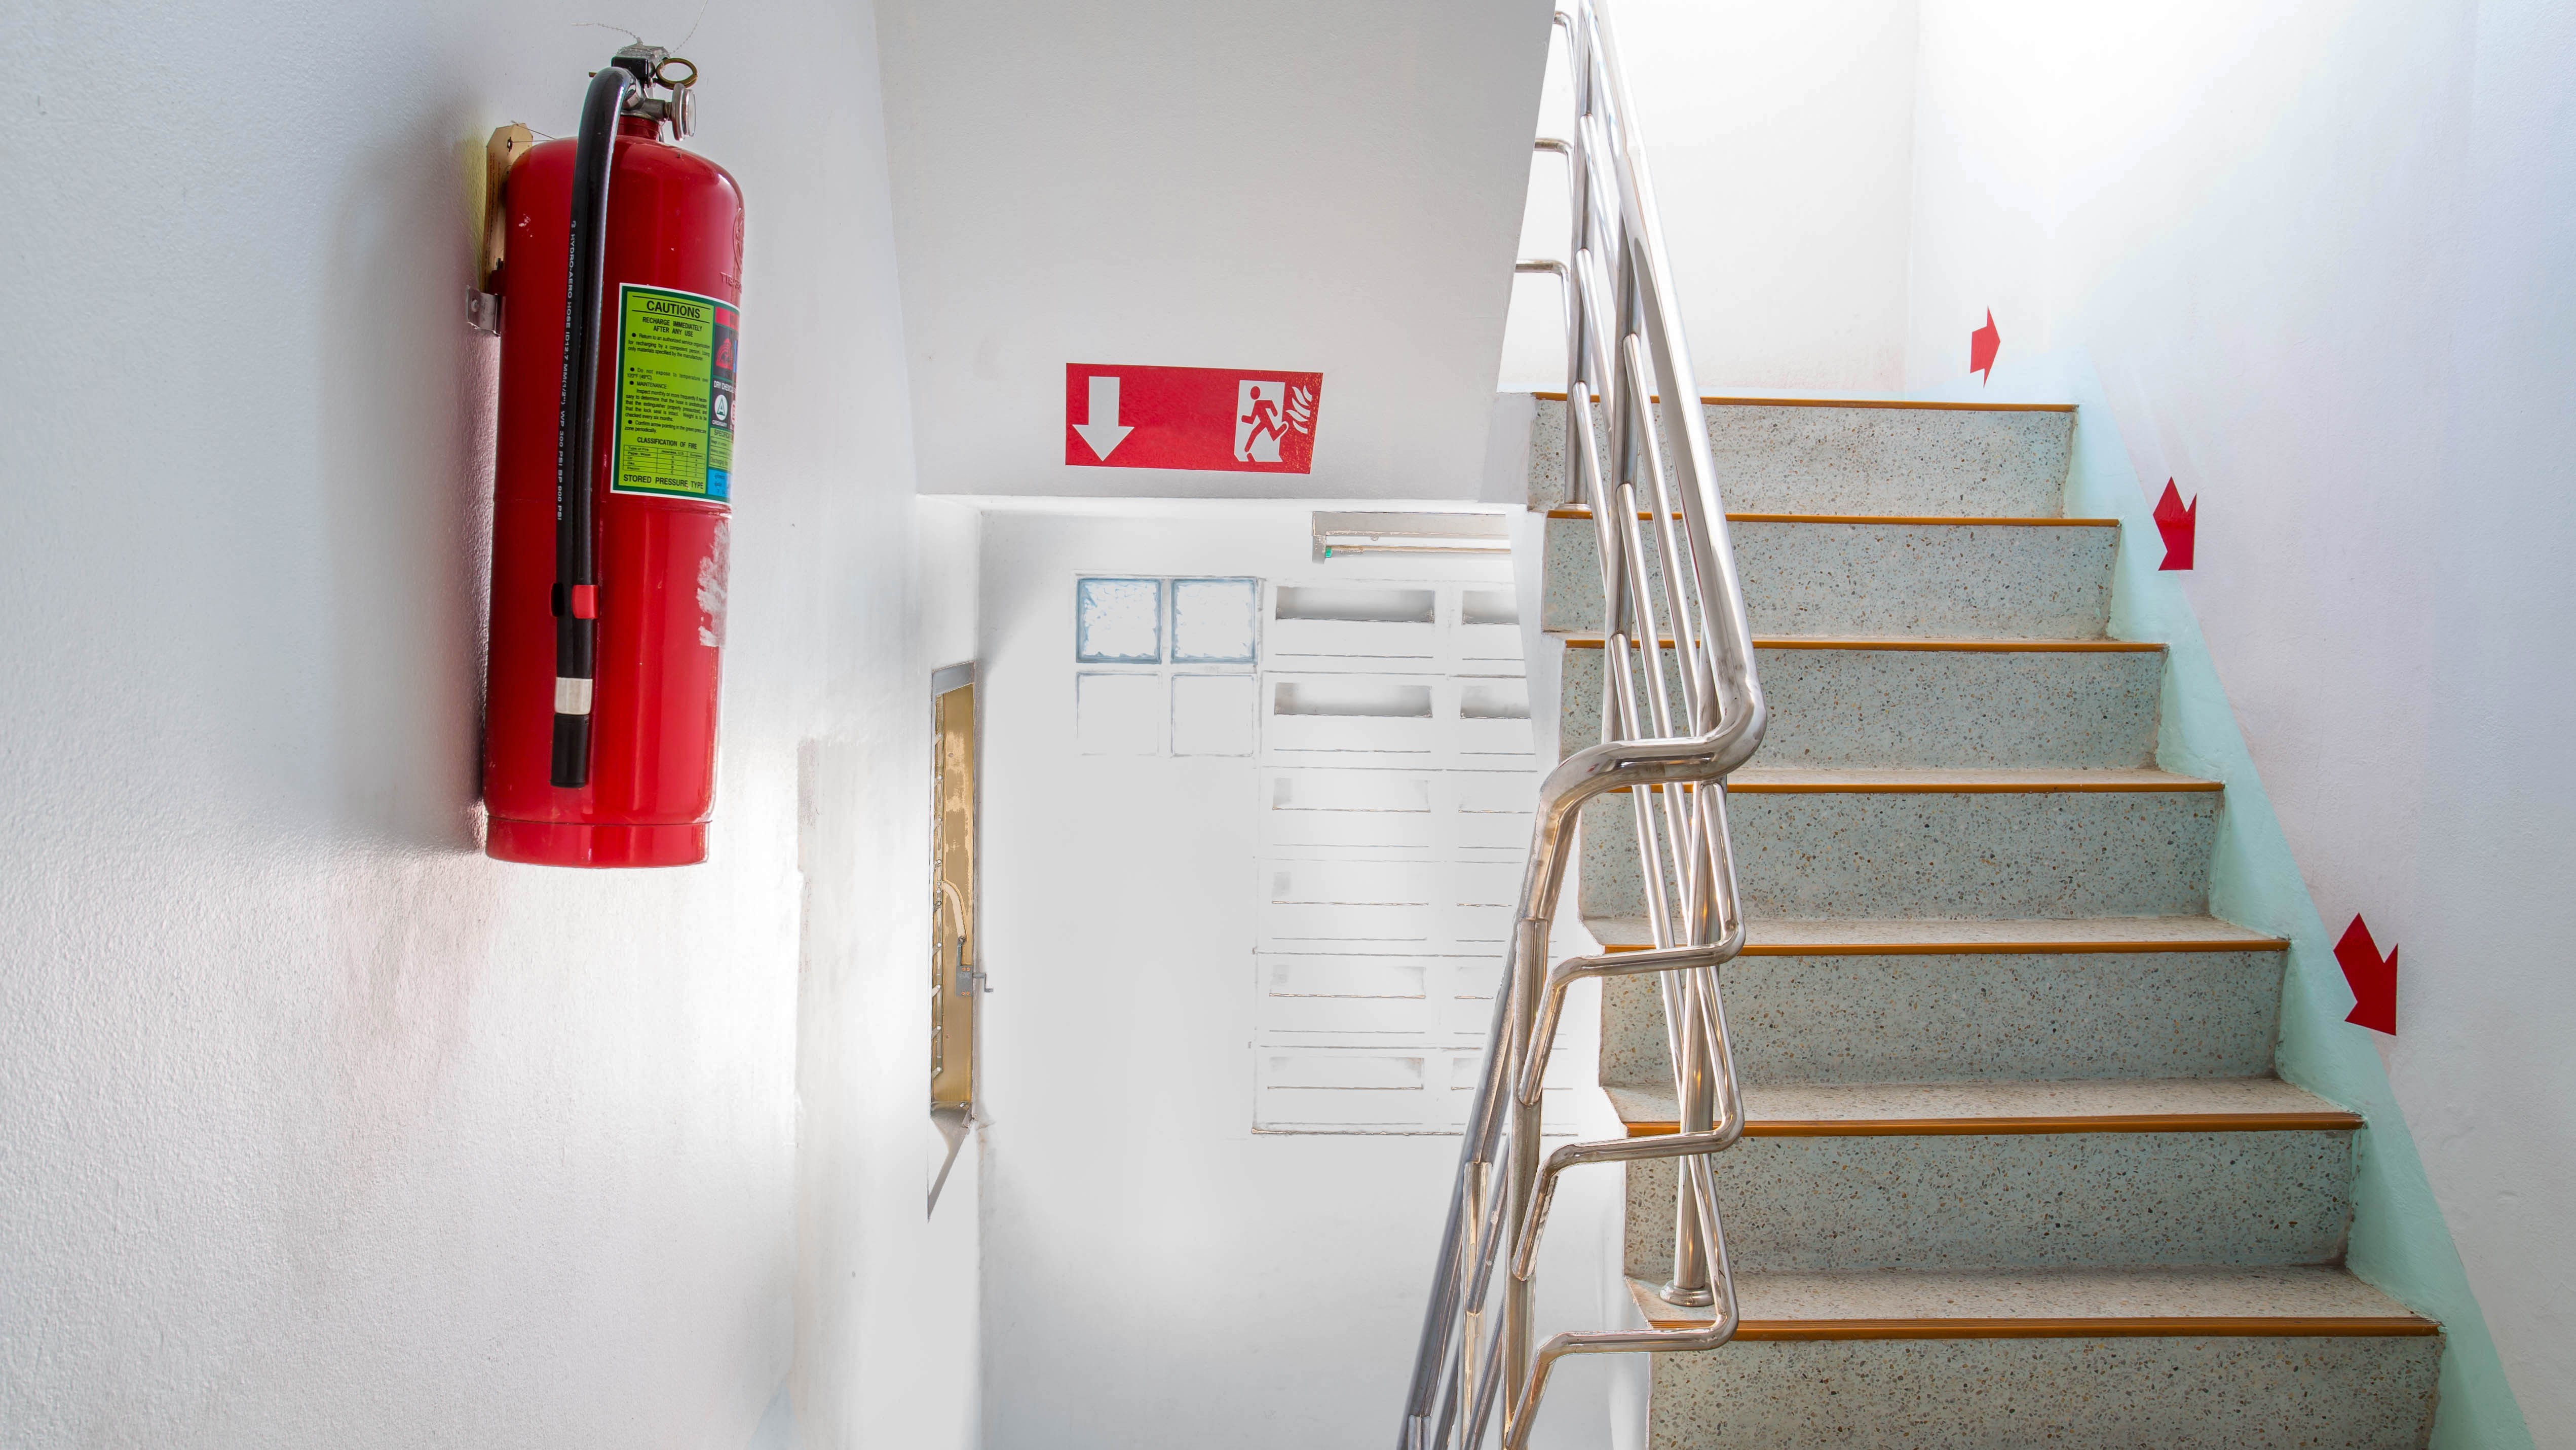 Fire extinguisher on wall next to staircase